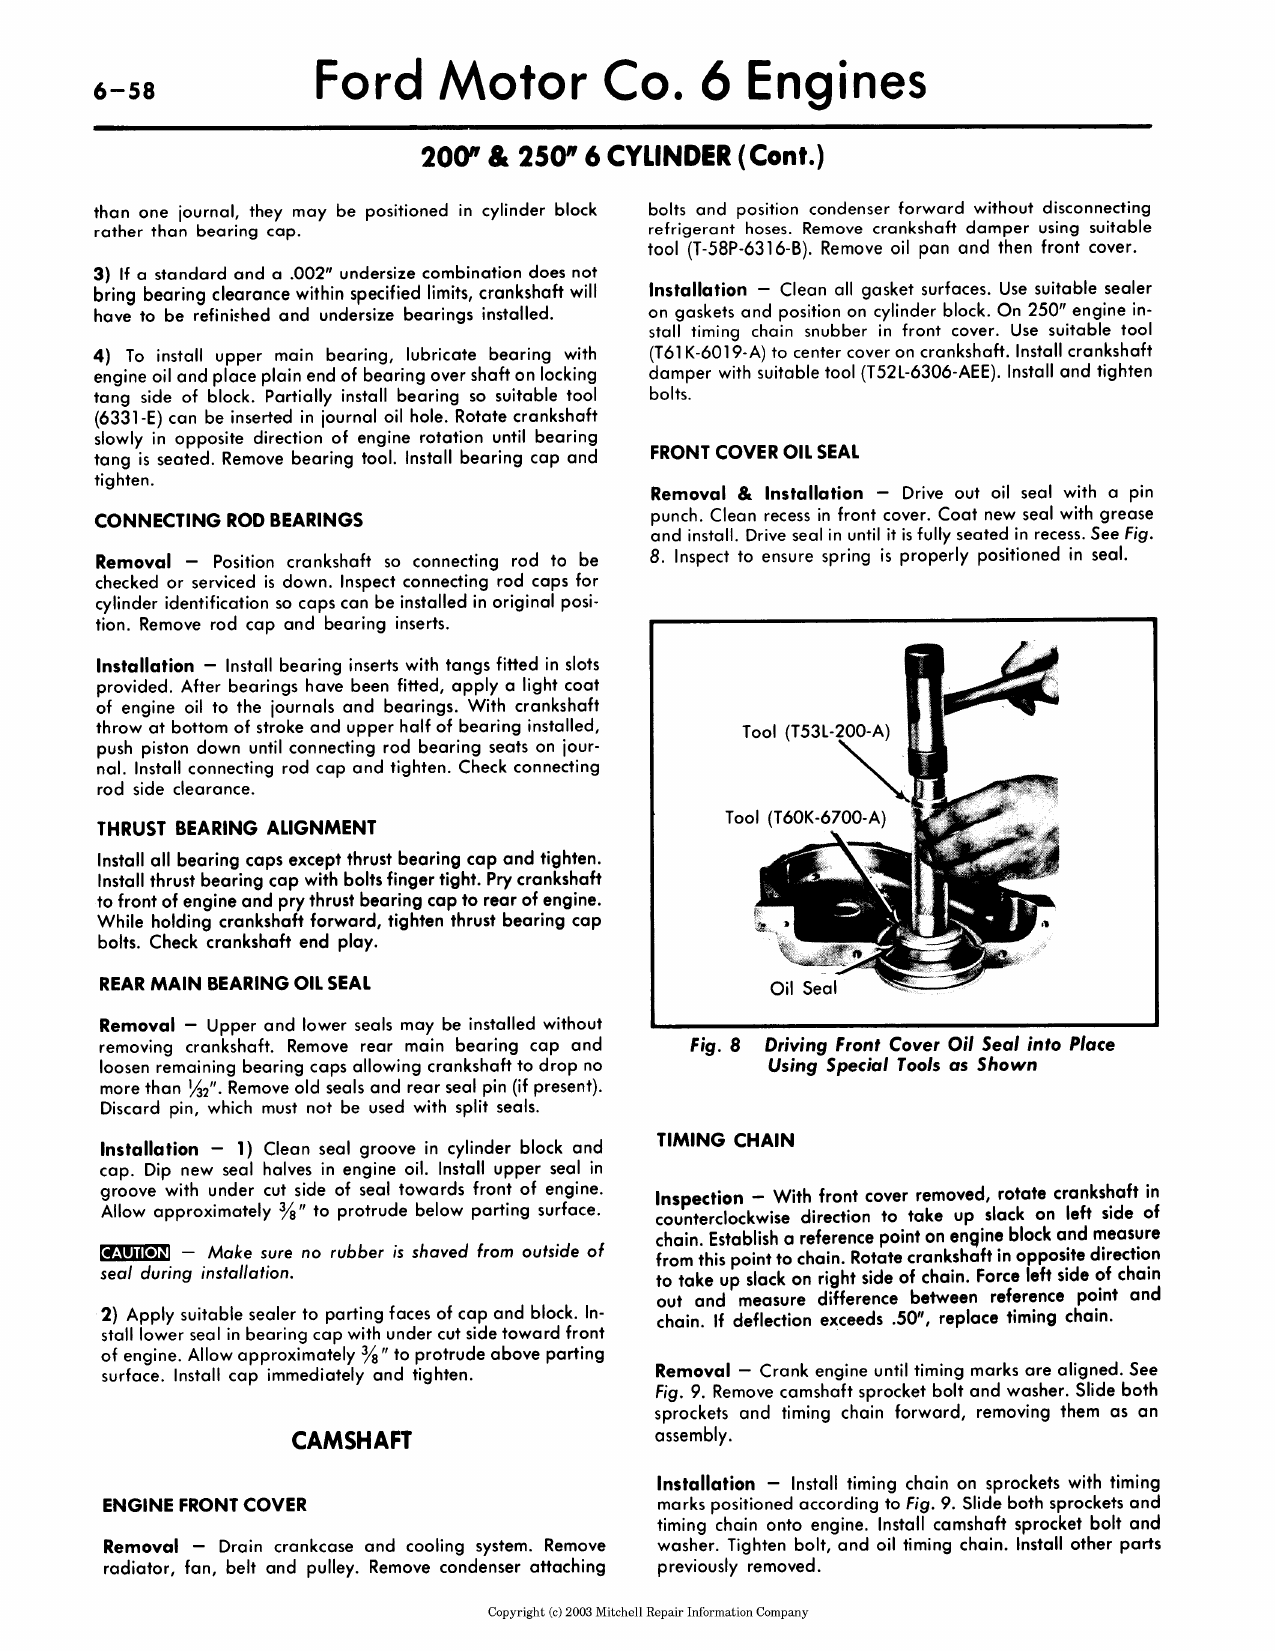 1979-1992 Ford Mustang shop manual Preview image 4